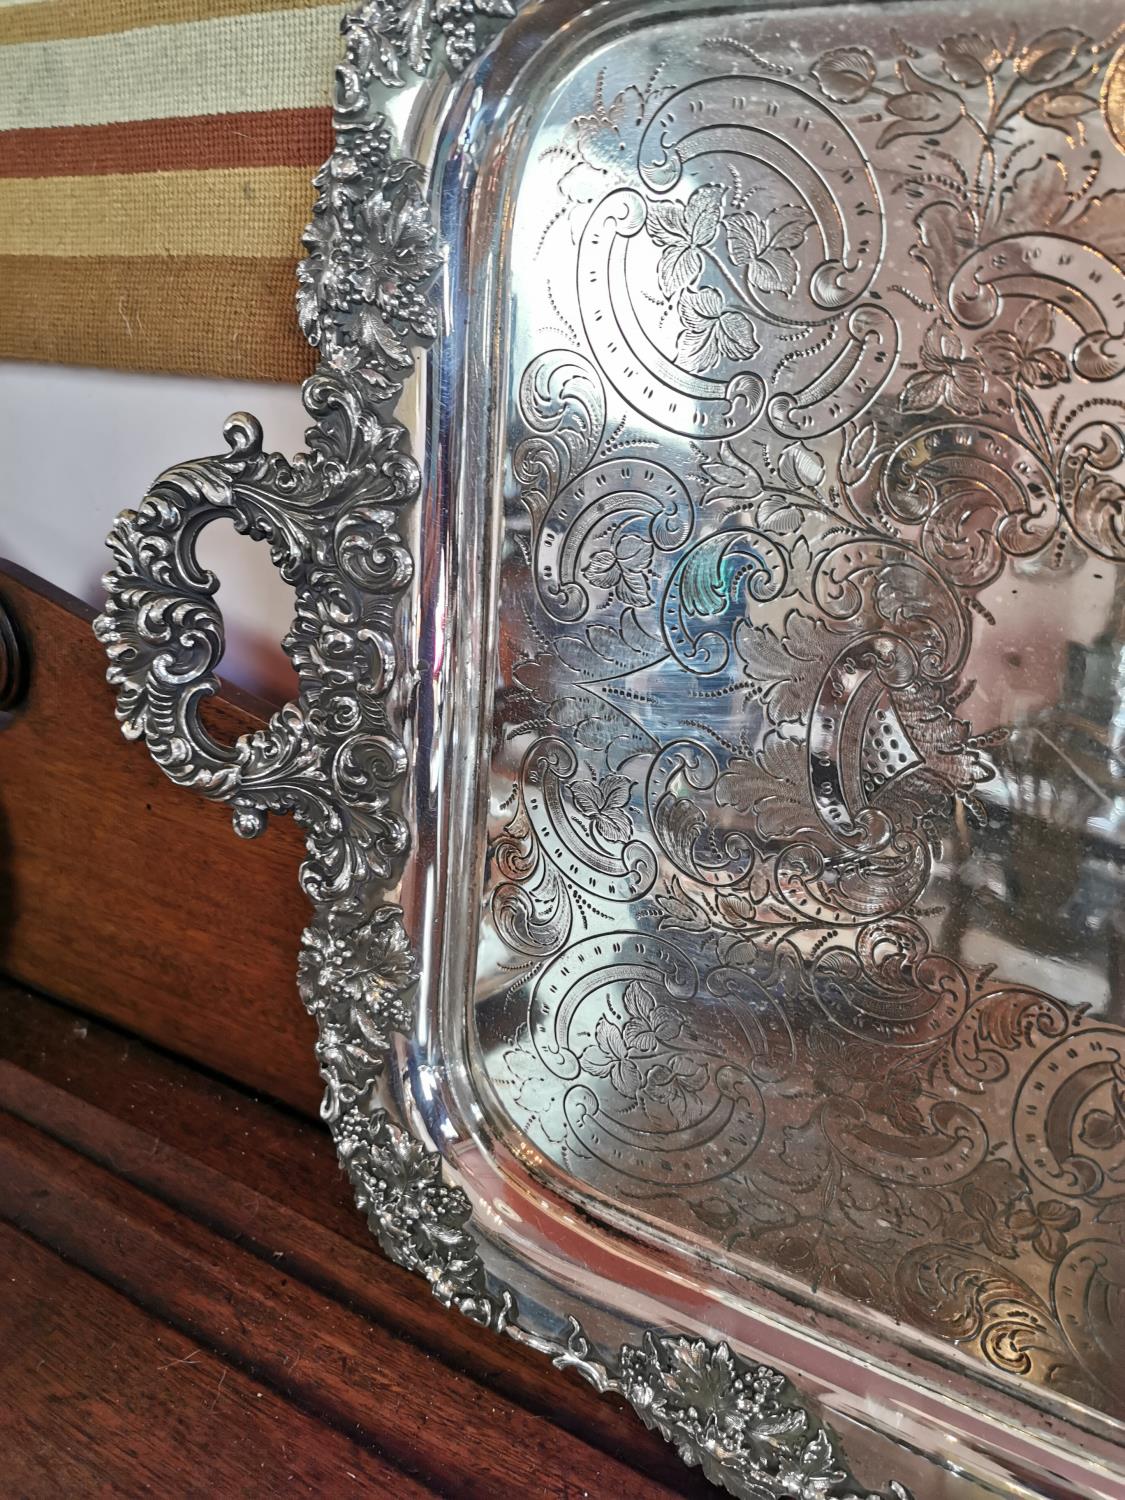 Early 20th C. silverplate serving tray. - Image 3 of 3